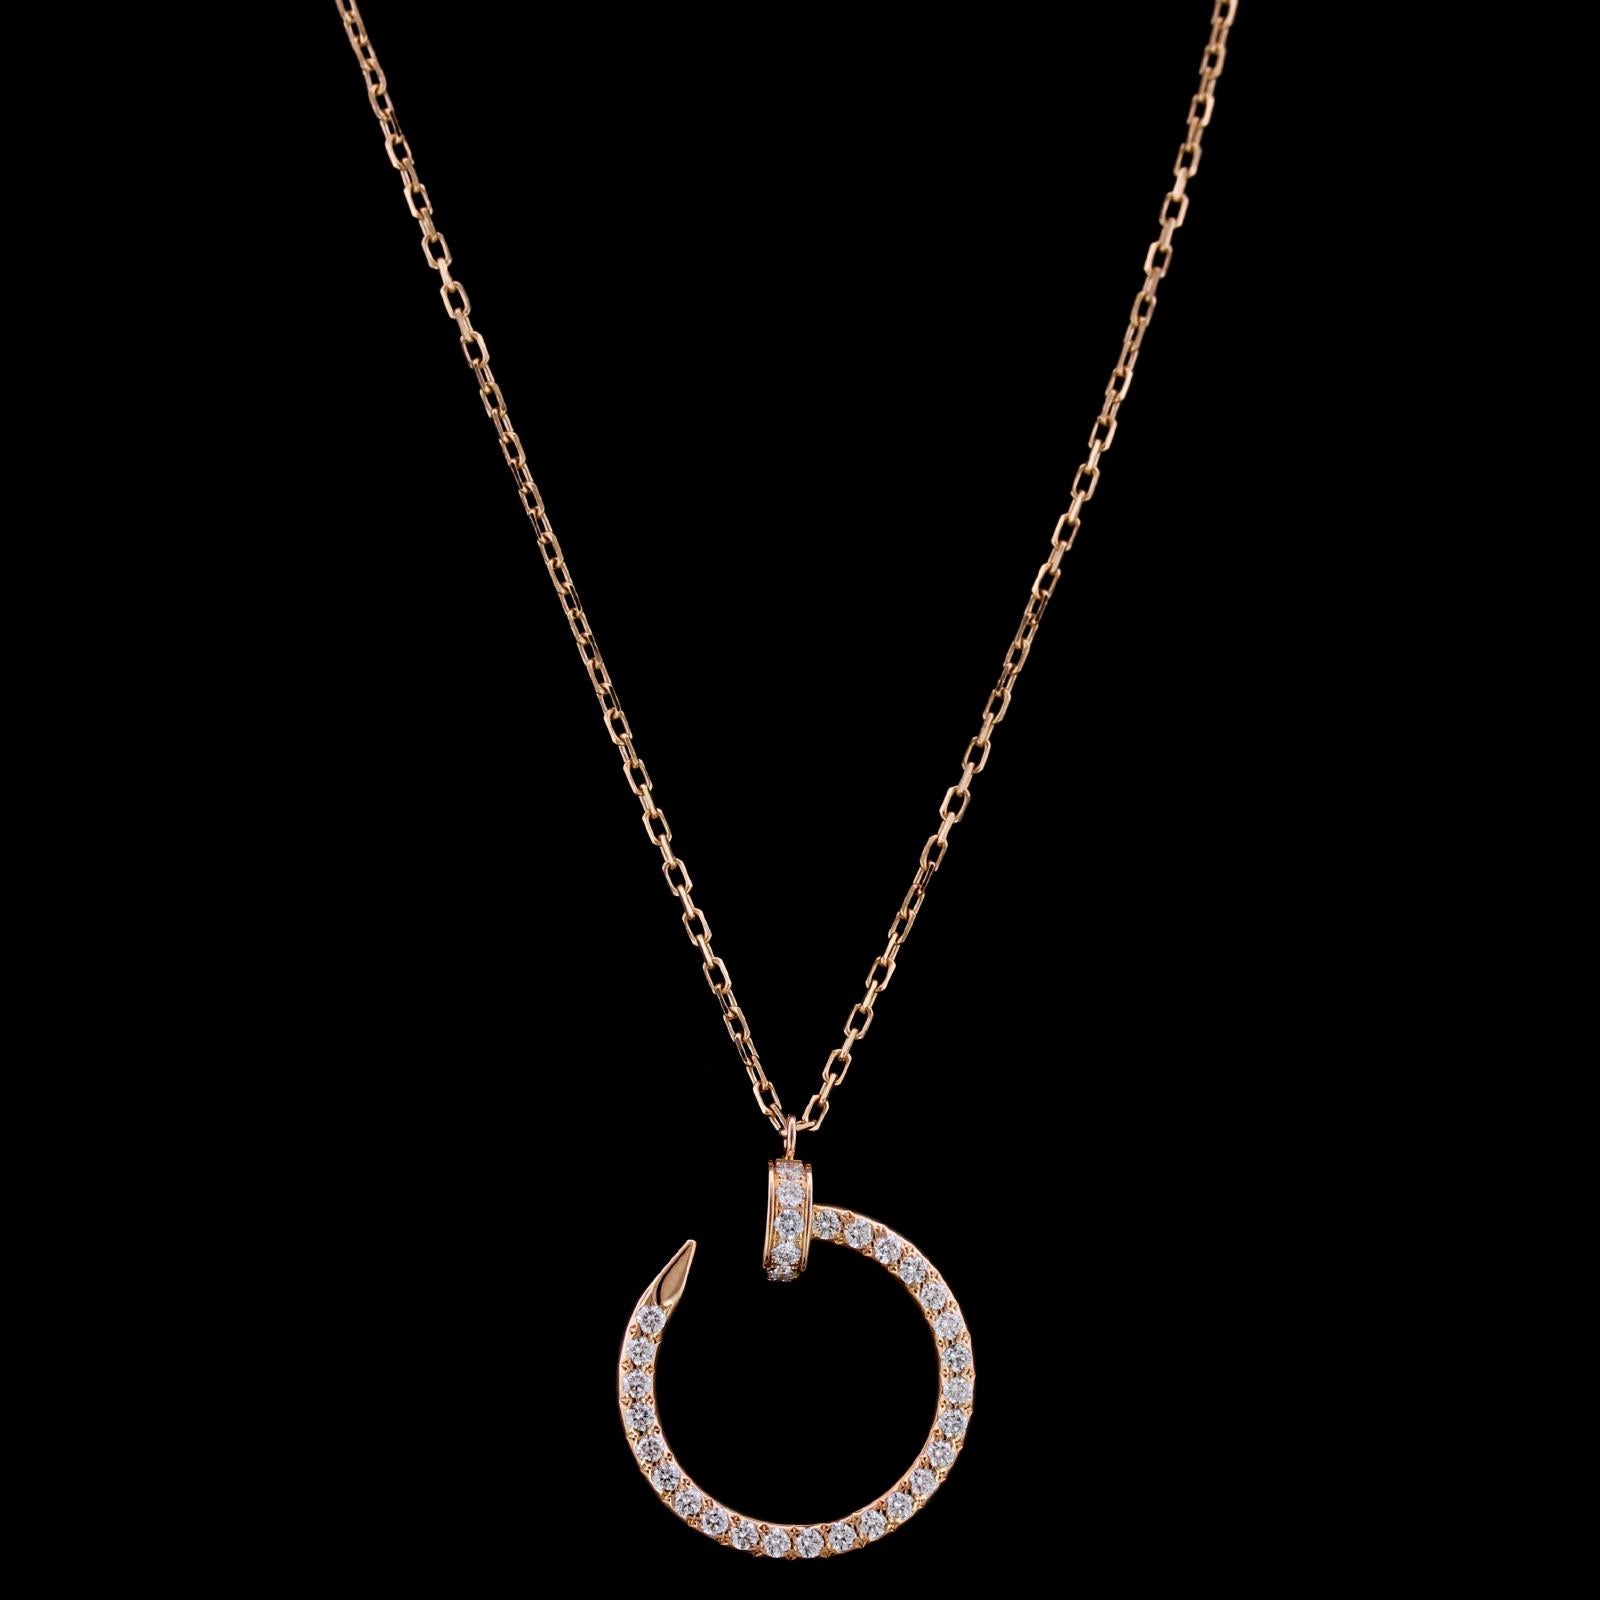 Cartier 18K Pink Gold and Diamond Juste un Clou Pendant Necklace. The pendant
is set with 36 full cut diamonds weighing .38cttw., suspended from a 16